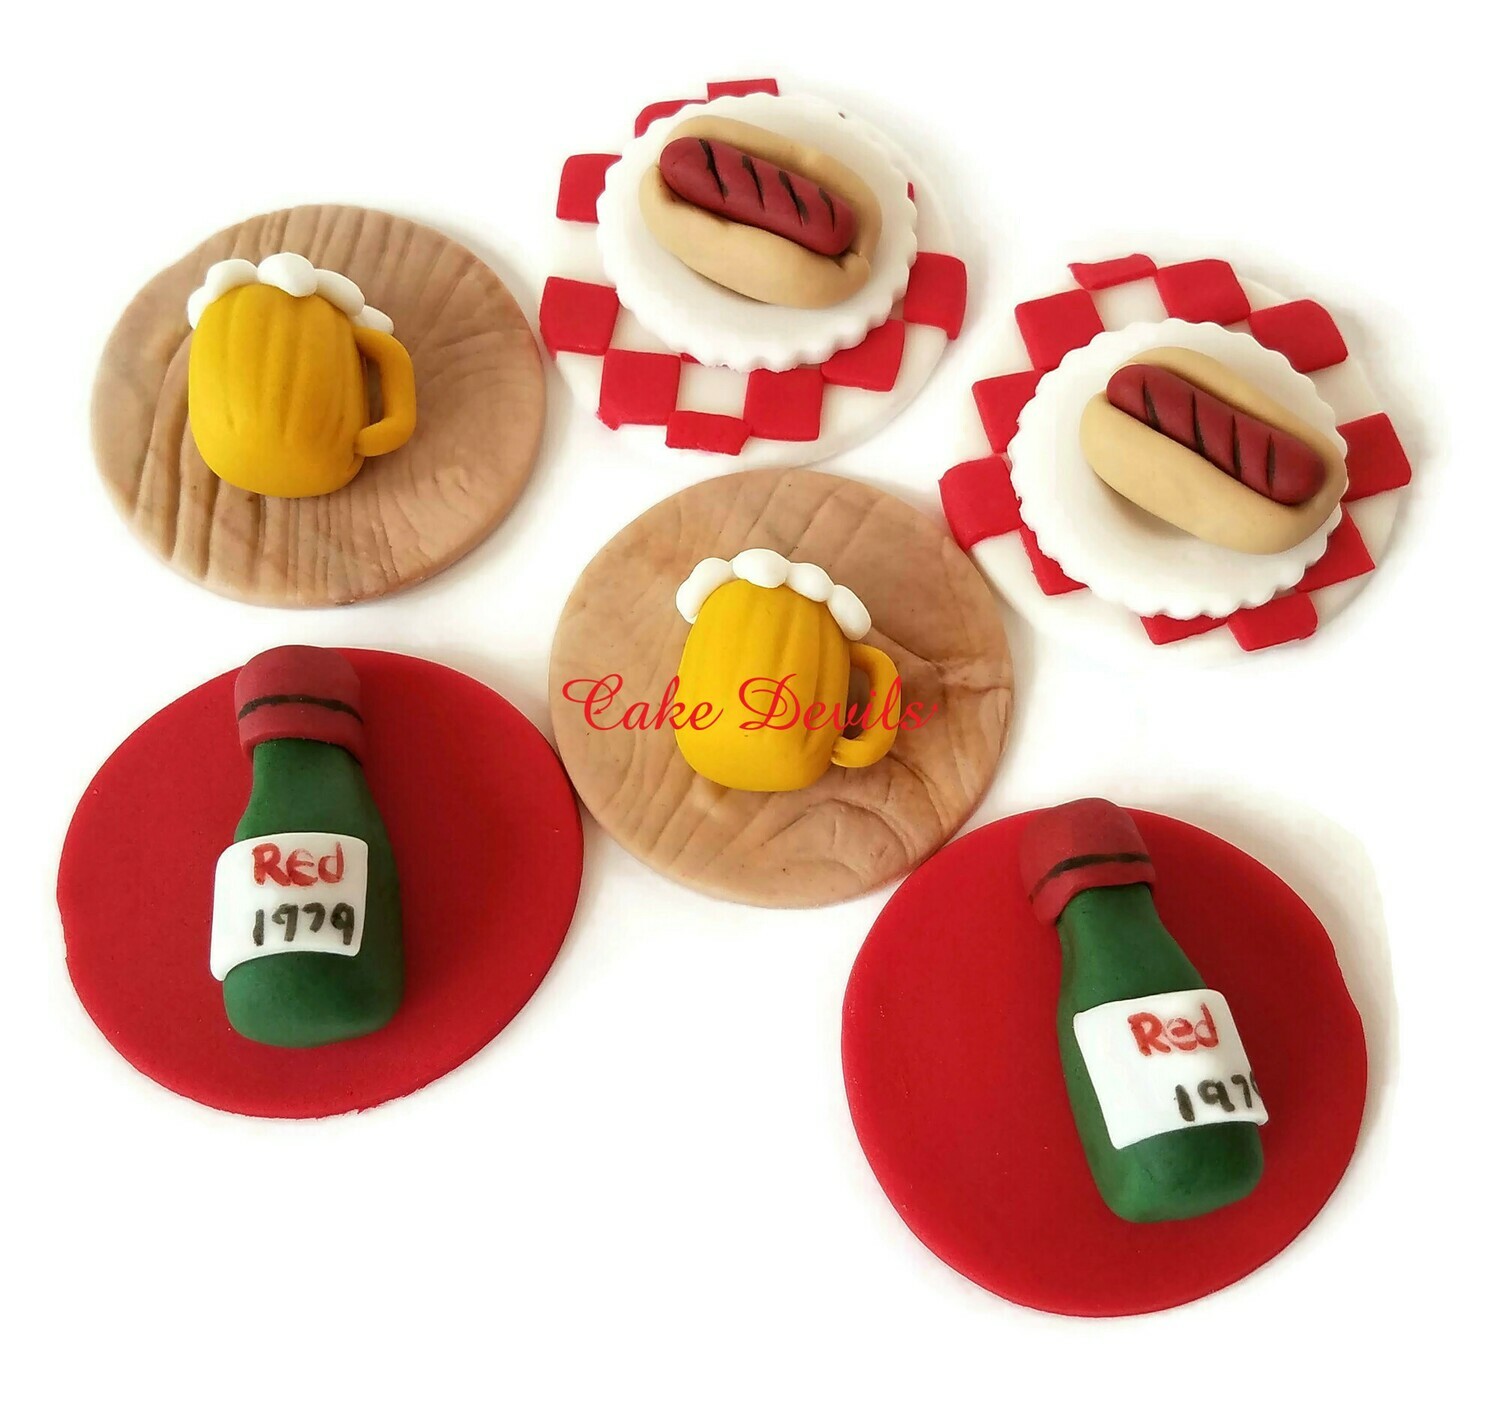 Wine Bottles, Hot Dogs, and Beer Mugs! Fondant Picnic themed Cupcake Toppers